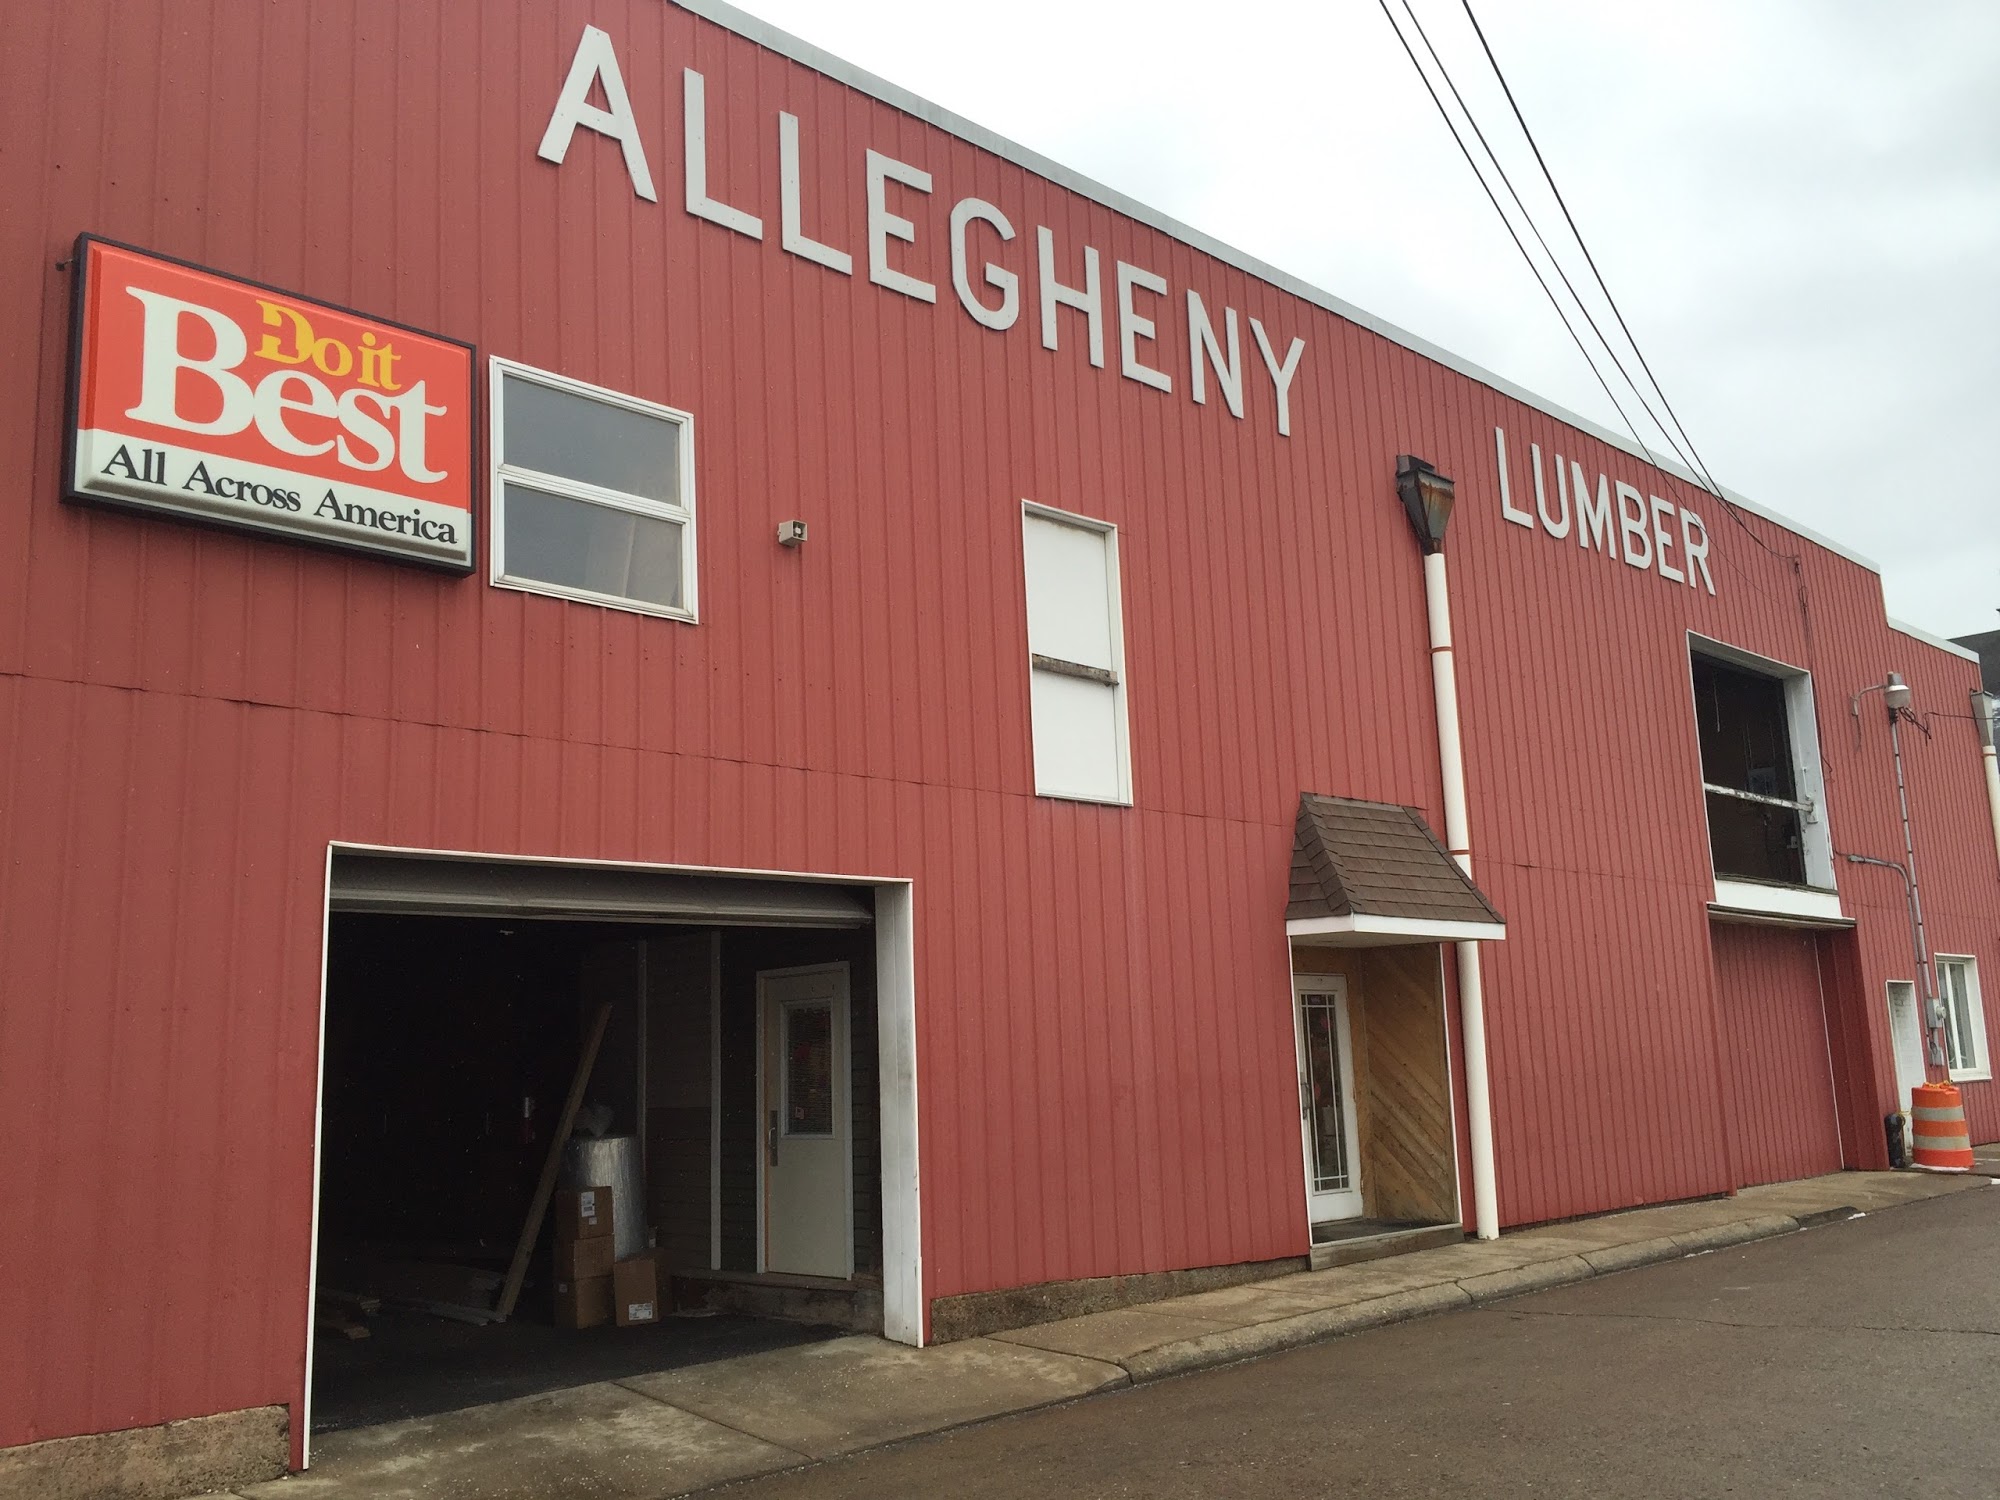 Allegheny Lumber & Supply Co.